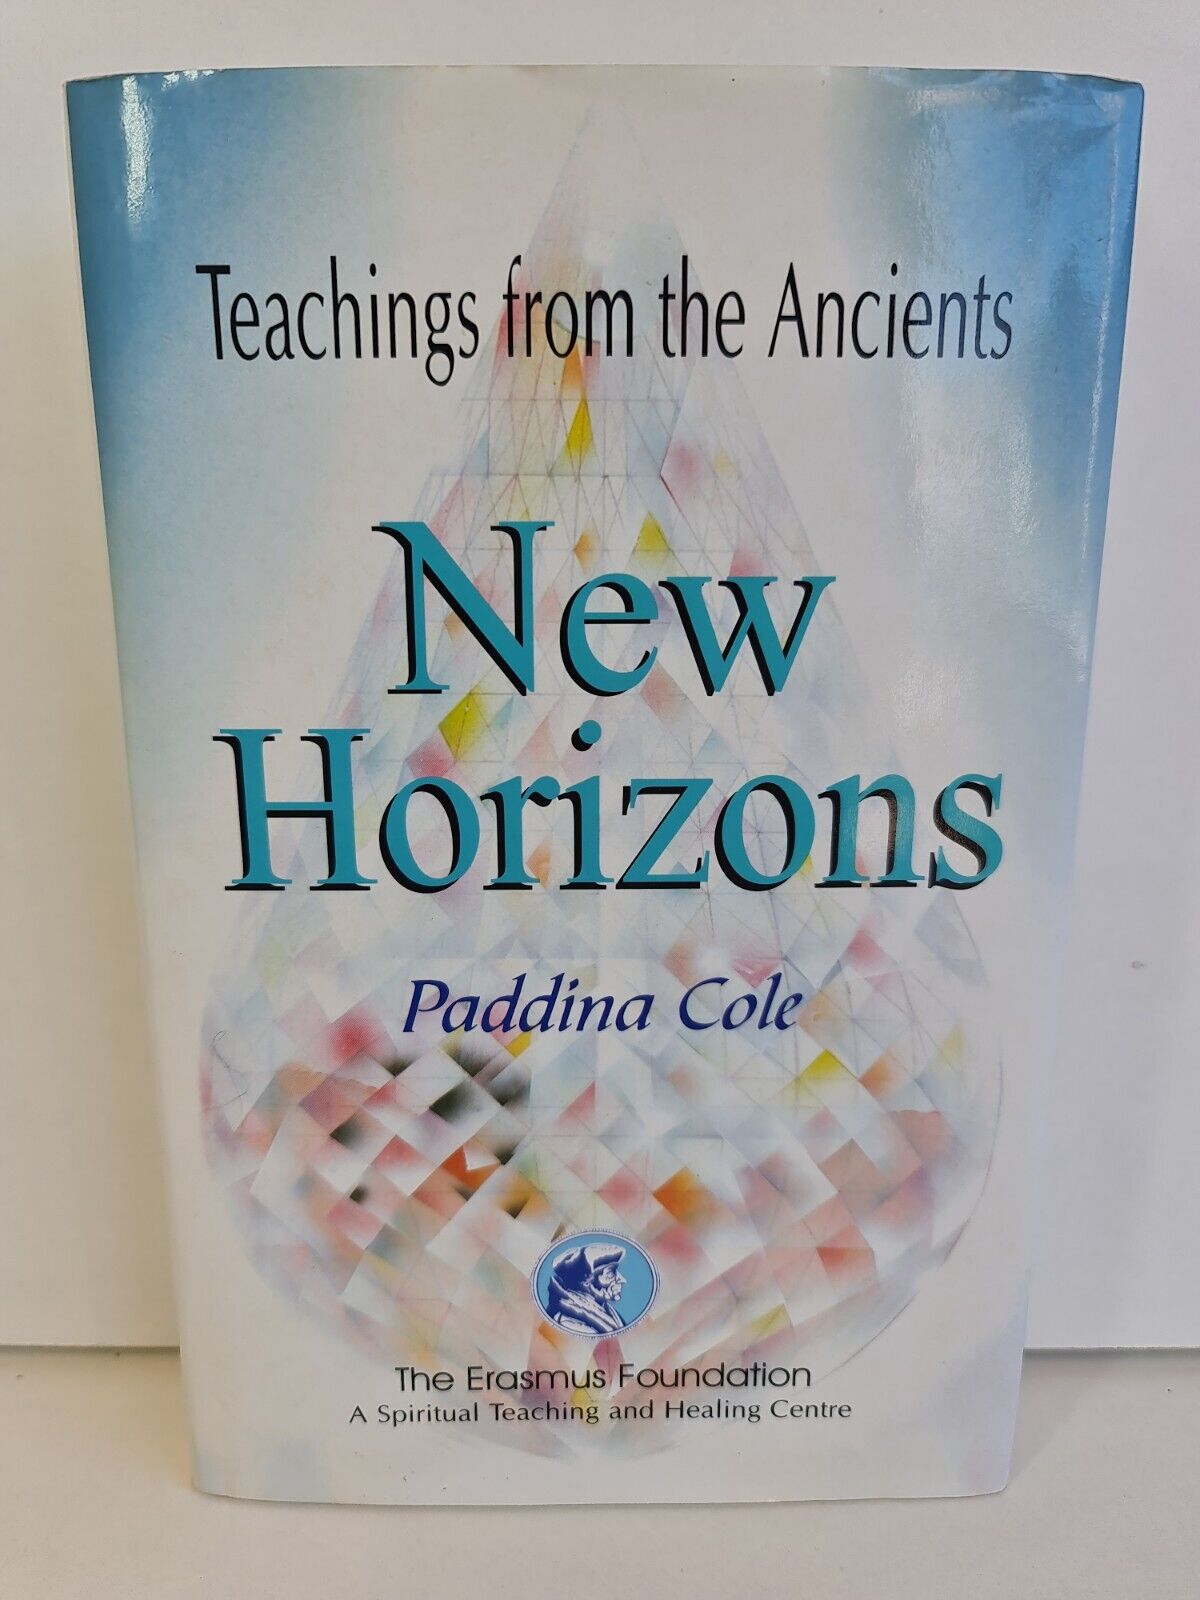 Teachings from the Ancients: New Horizons by Lady Paddina Cole